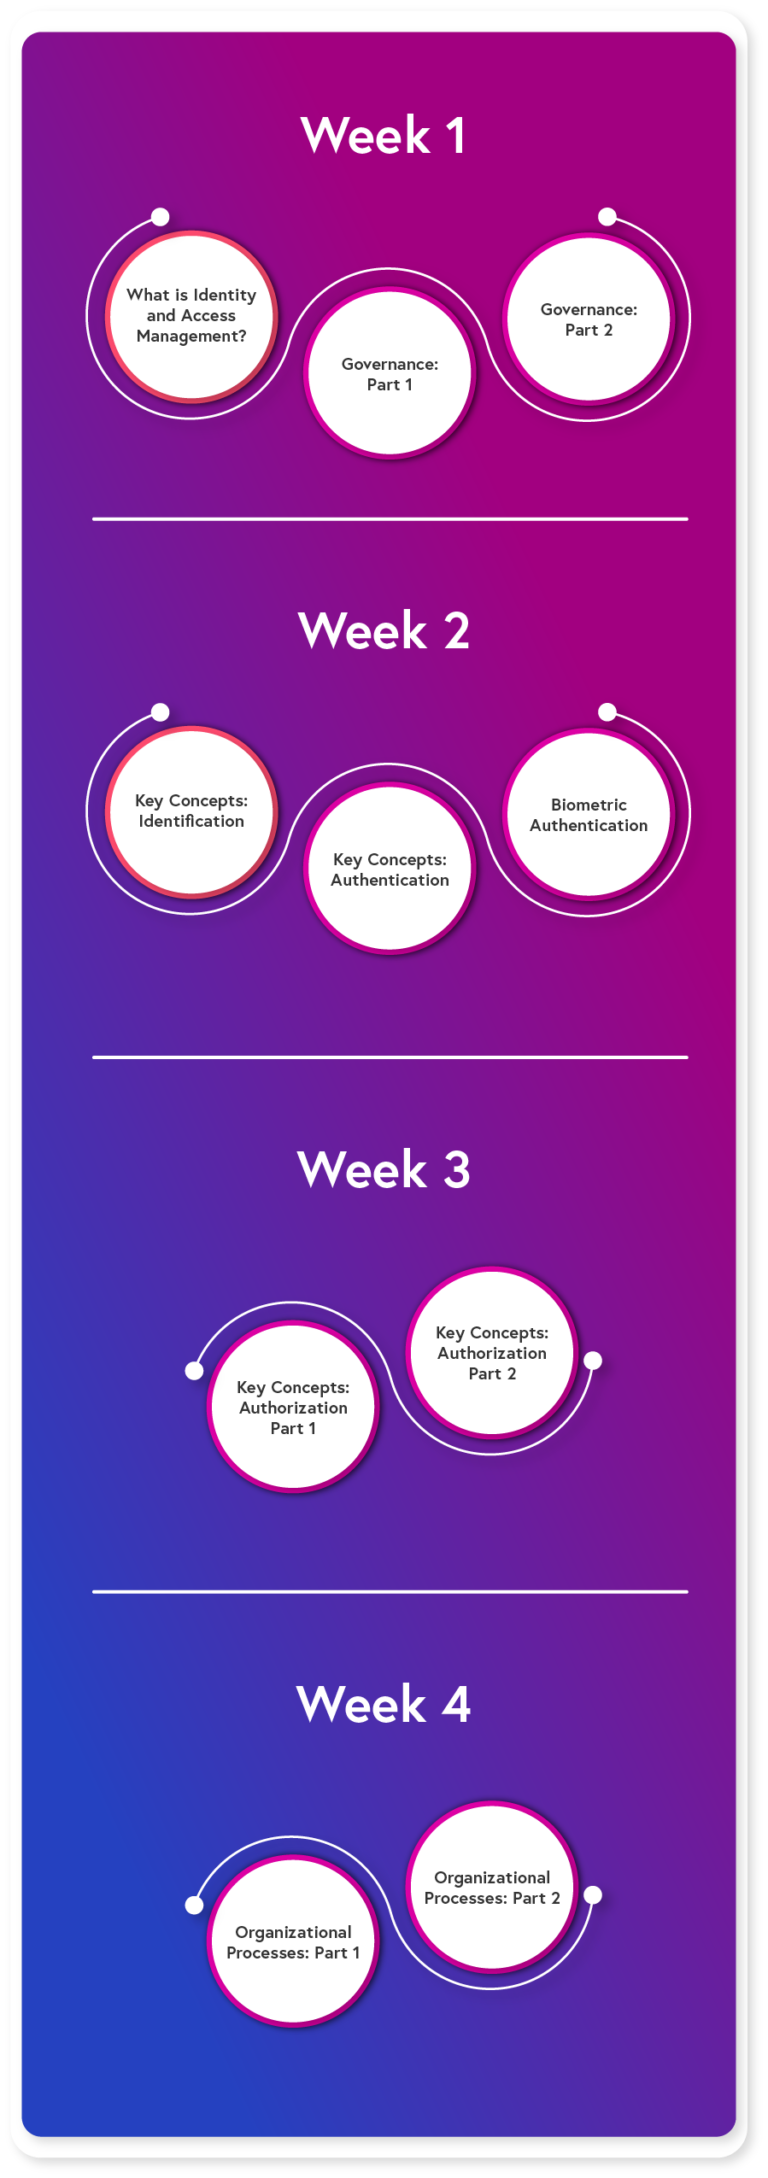 Week 1: What is identity and access management? Governance part 1 and part 2. Week 2: Key concepts identification. Key concepts authentication. Biometric authentication. Week 3: Key authorization part 1 and part 2. Week 4: Organizational processes part 1 and part 2.